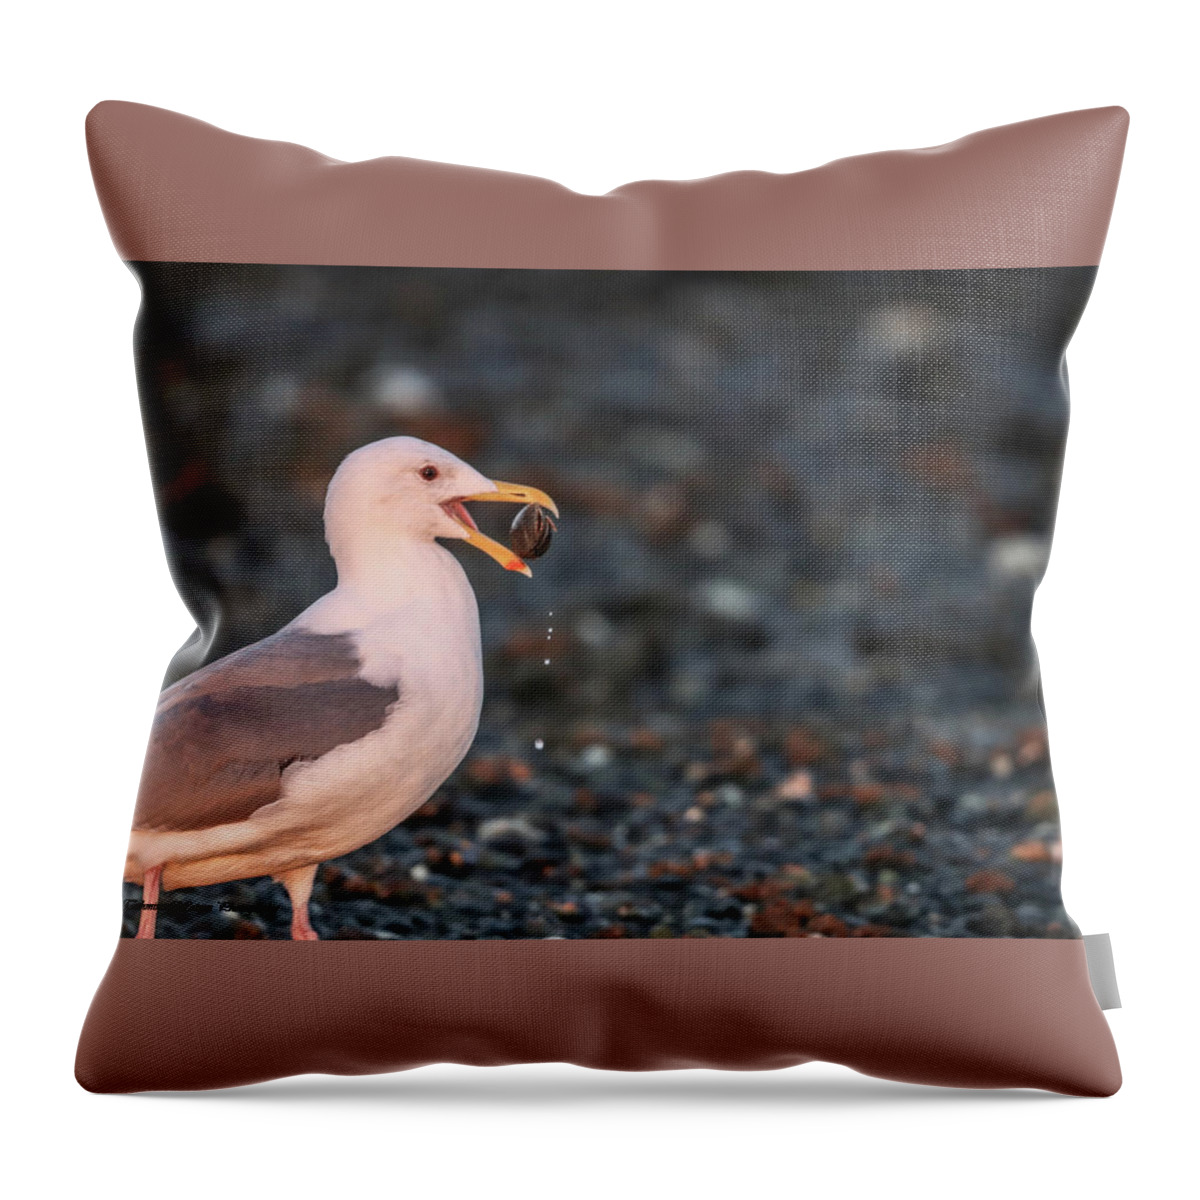 Sea Gull Throw Pillow featuring the photograph Sea Gull and The Pebble by Tahmina Watson